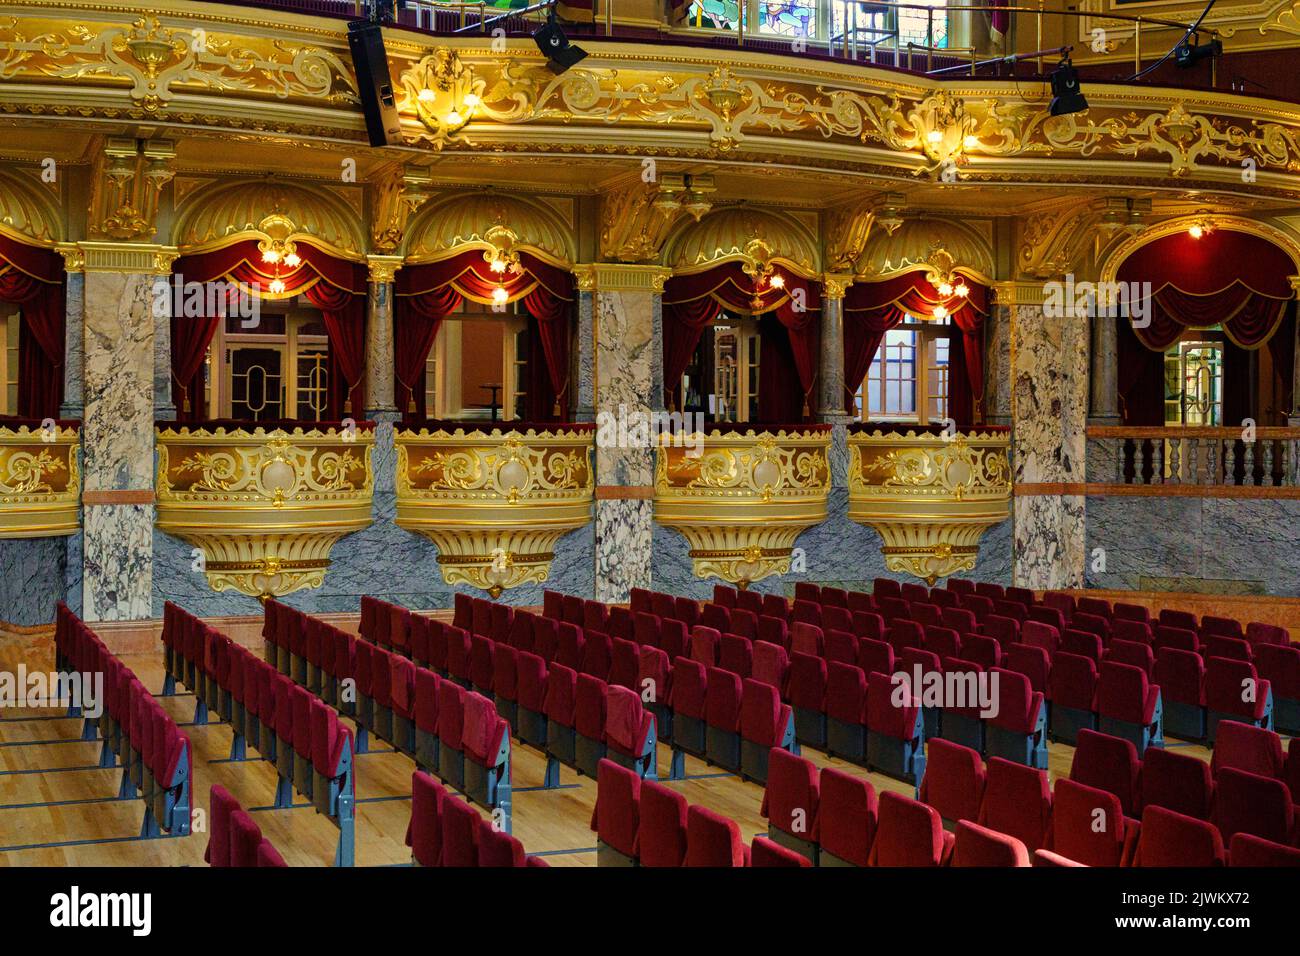 The Grand Hall inside The Royal Hall with rows of seating with box seating surrounded with vibrant gold decoration, Harrogate, North Yorkshire, UK. Stock Photo